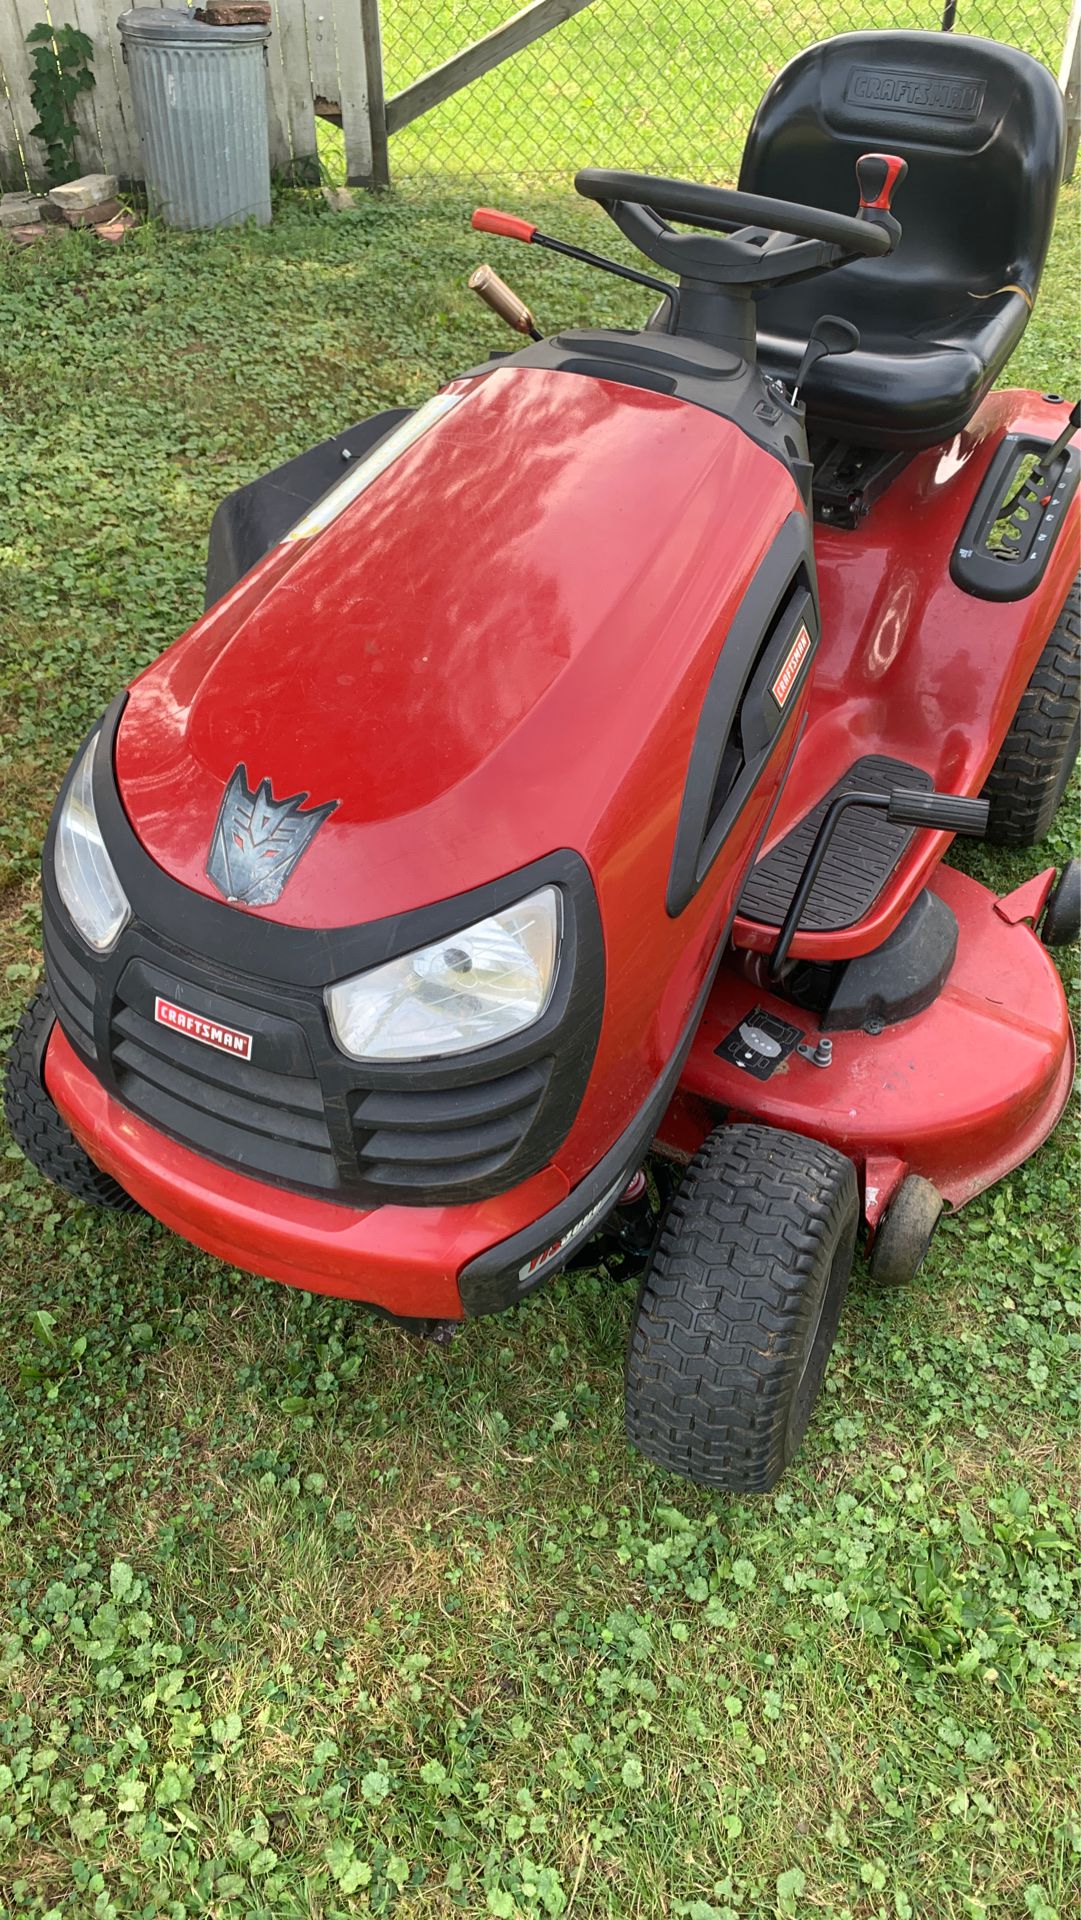 Craftsman riding mower with a 46 inch deck